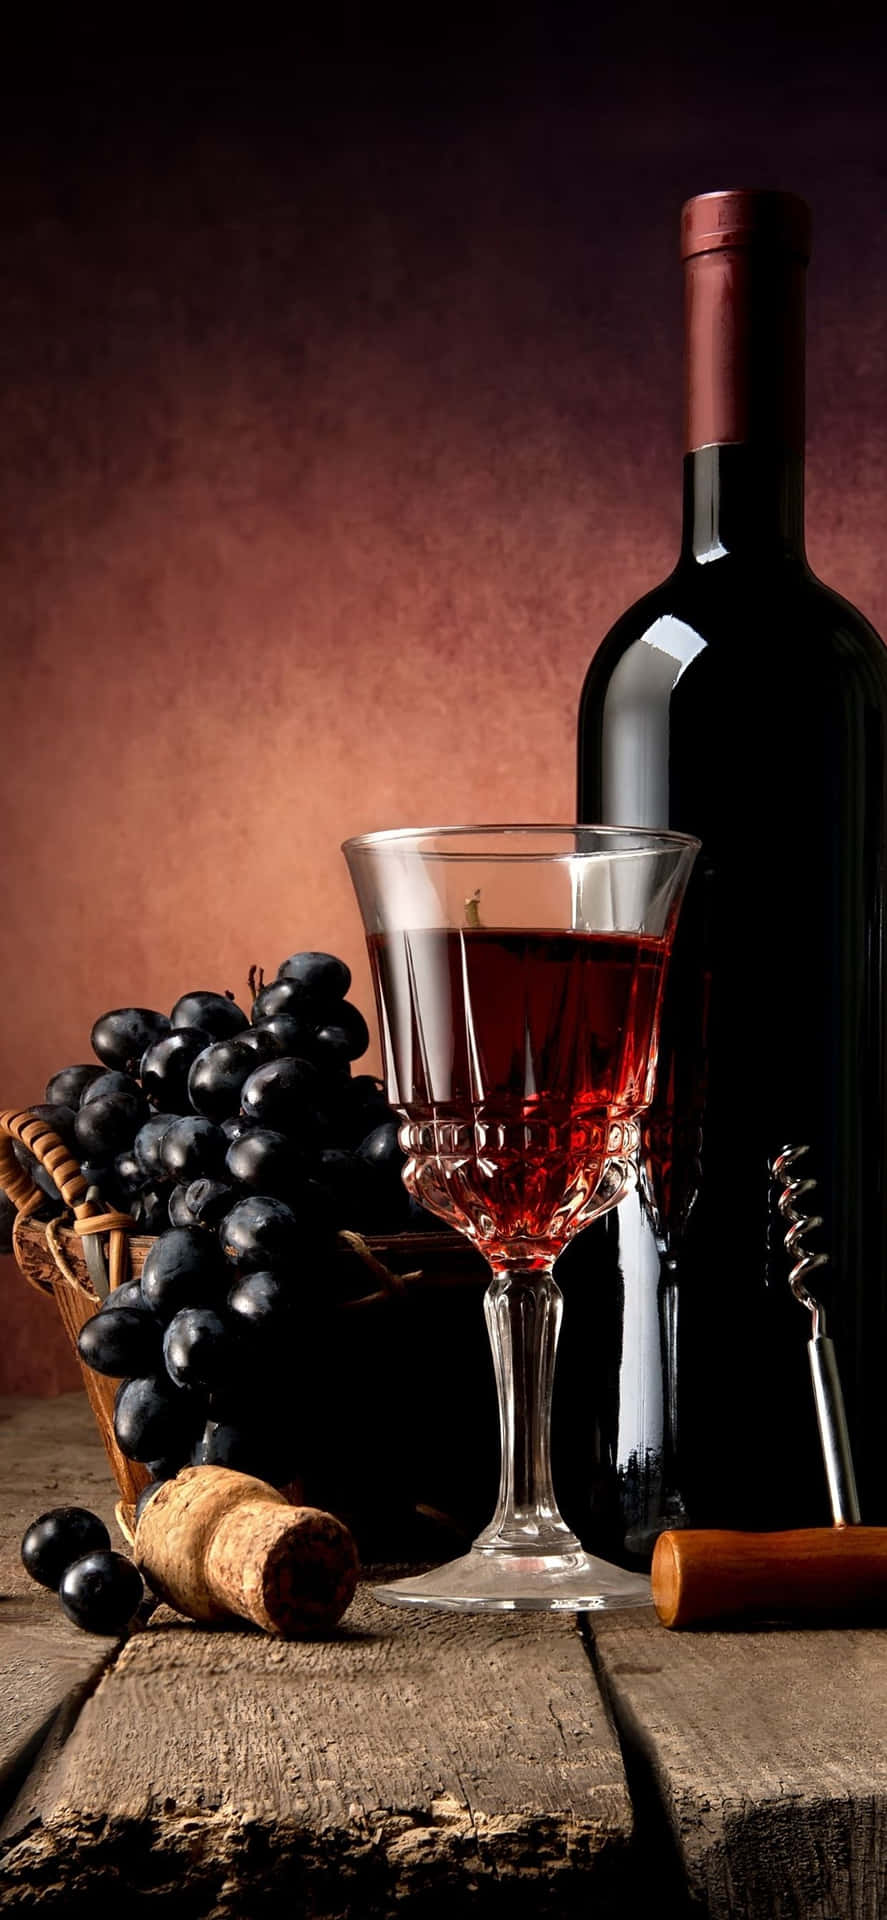 A luxurious red wine glass elegantly holding a rich full-bodied wine. Wallpaper